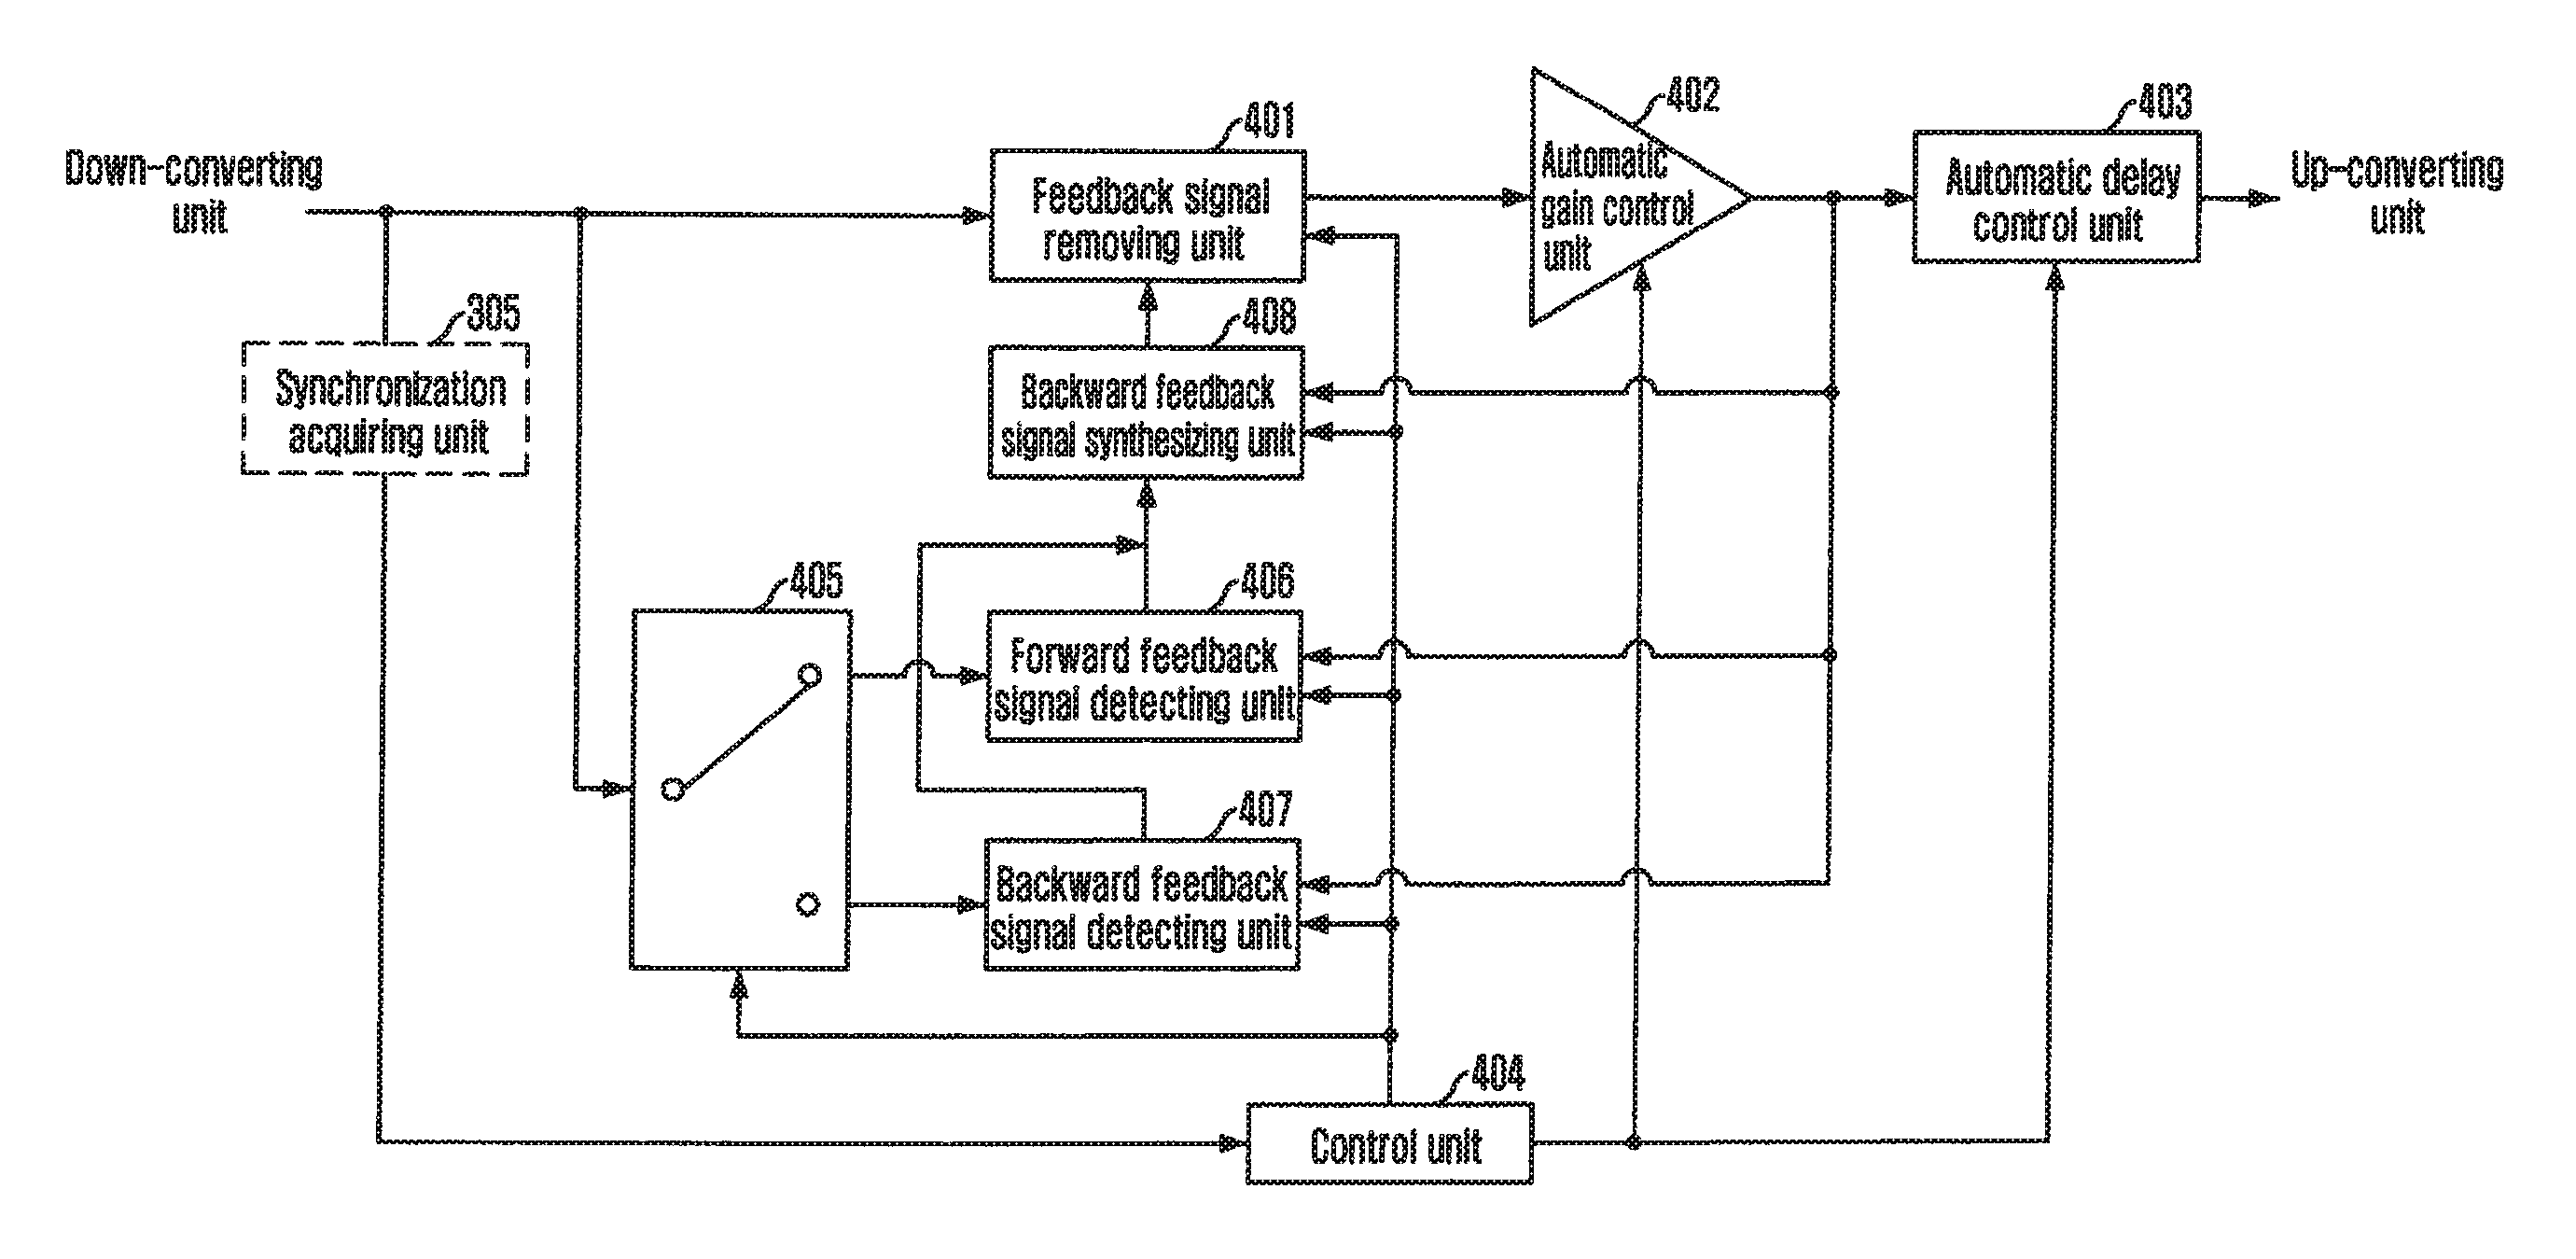 United AFEC and method thereof, and TDD radio repeater apparatus using the same